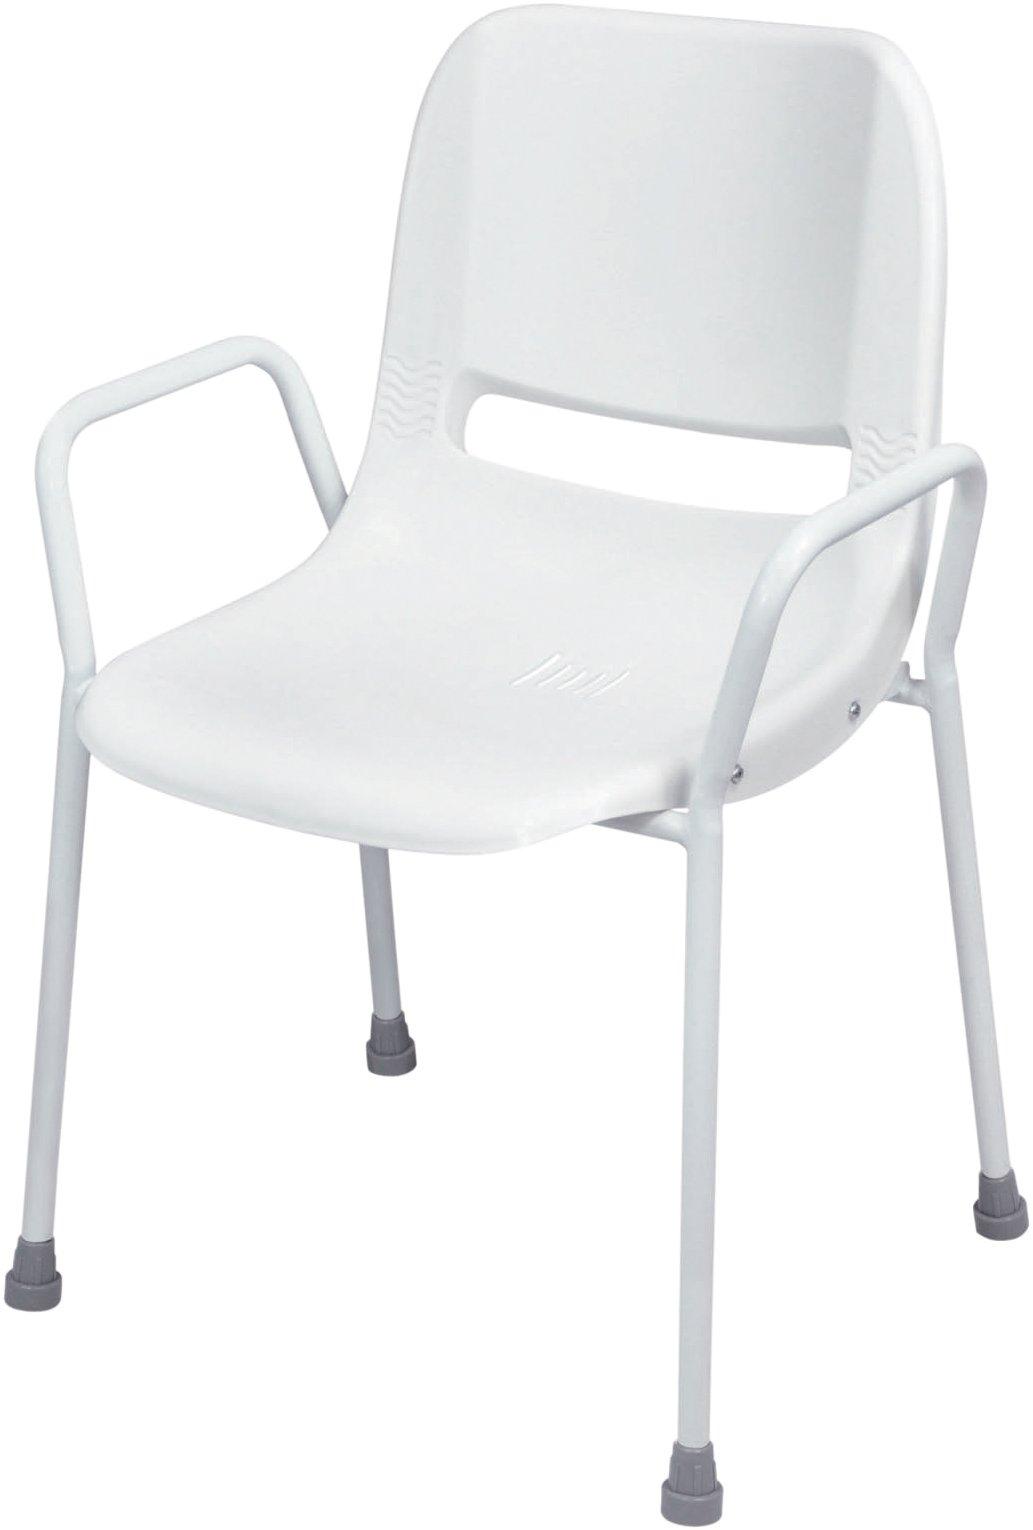 Milton Stackable Shower Chair White